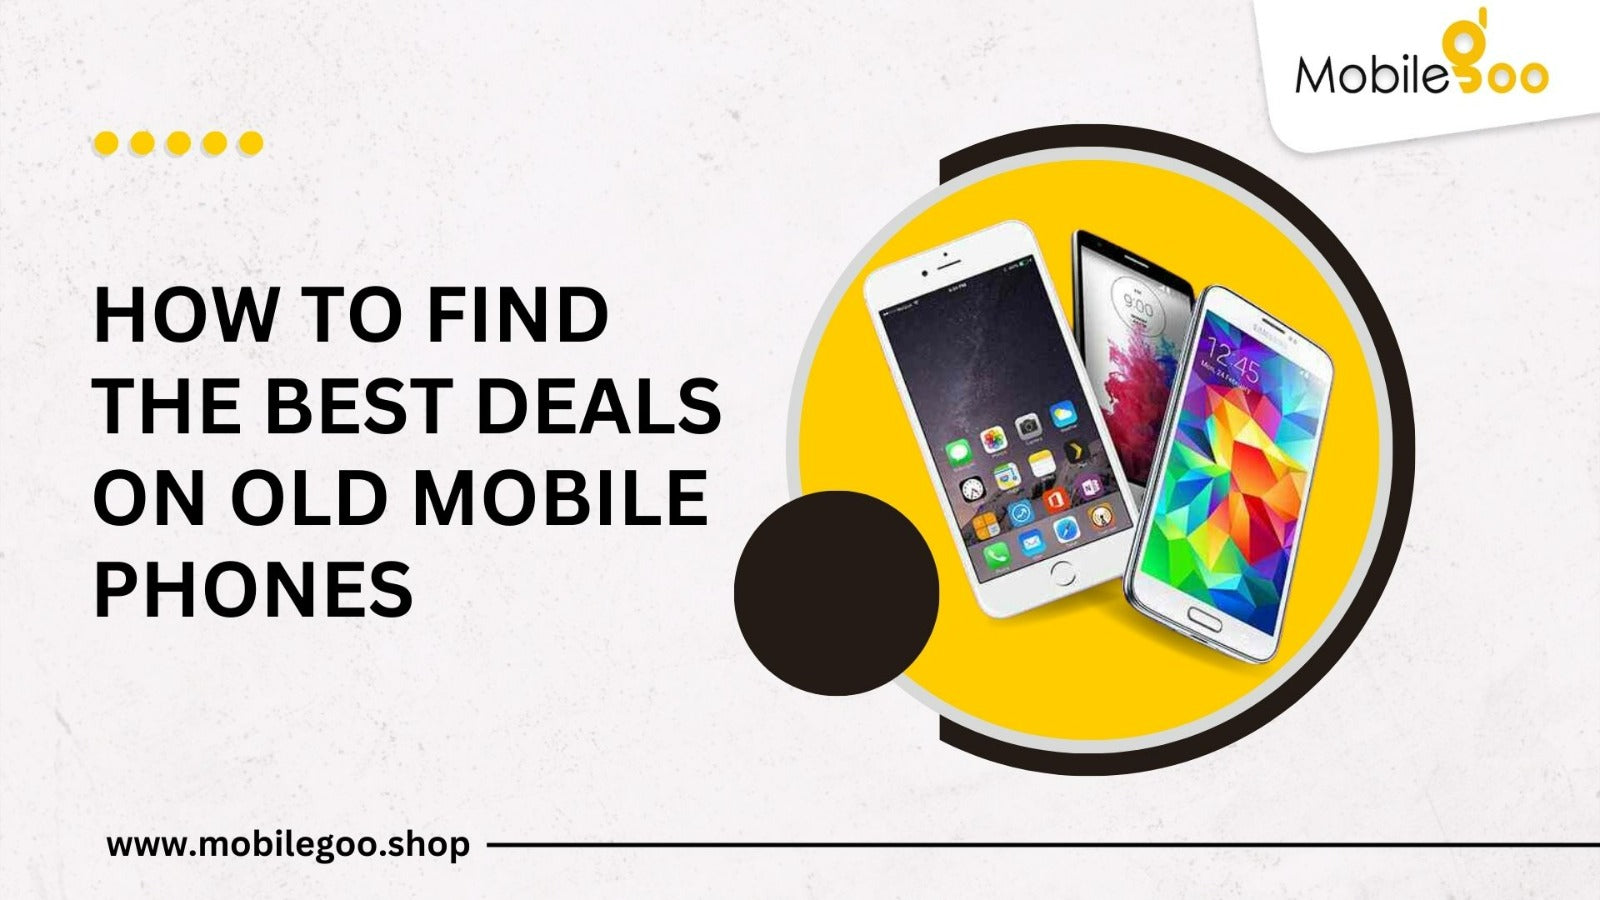 How to find the best deals on old mobile phones